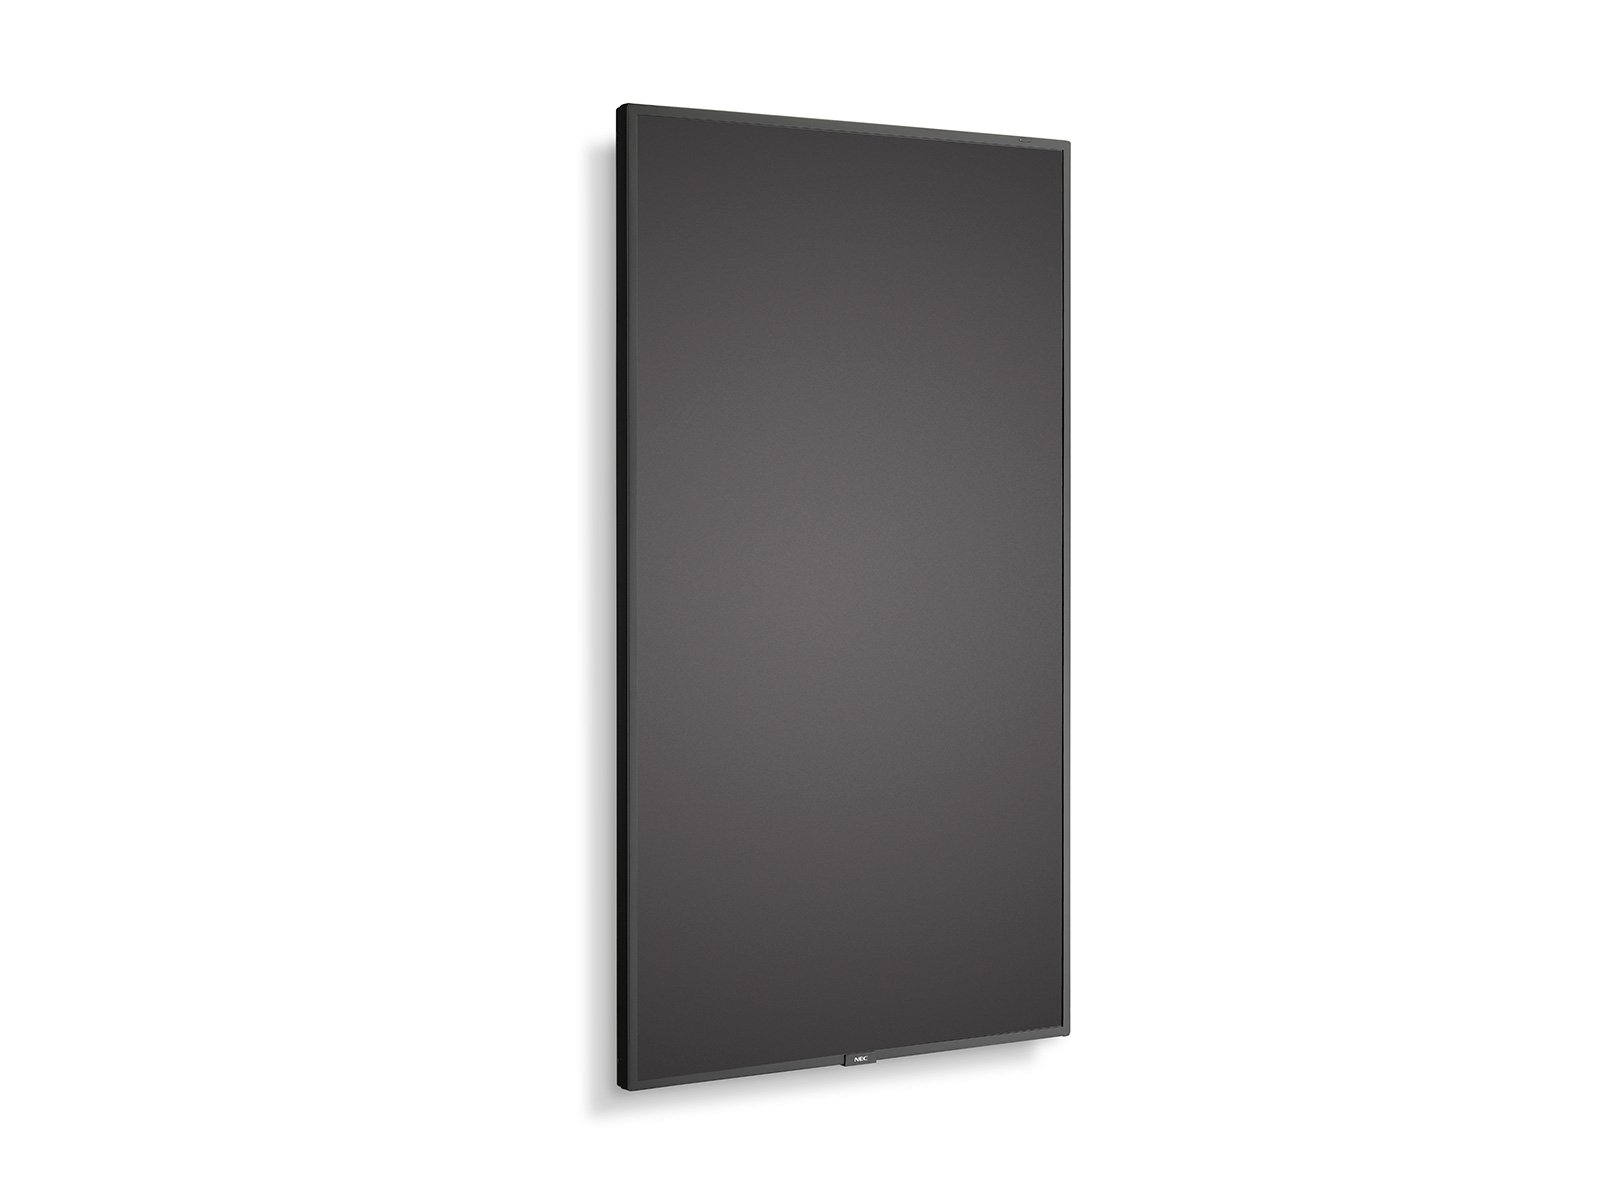 NEC MultiSync ME651 - 65 inch - 400 cd/m² - Ultra-HD - 3840x2160 Pixel - 18/7 - Message Essential Large Format Display